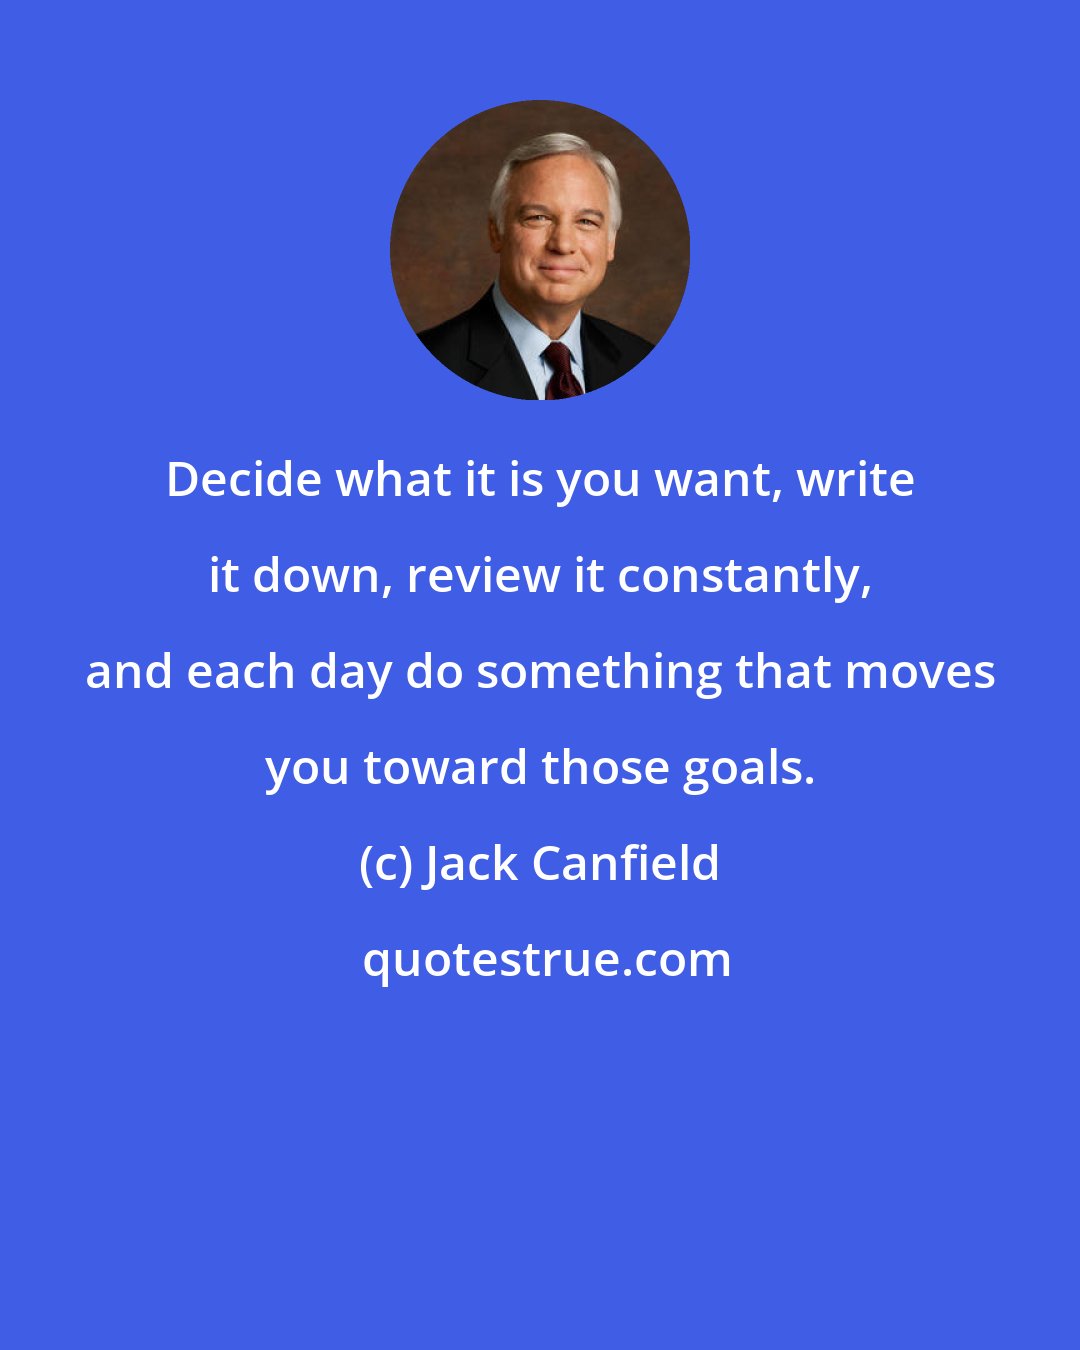 Jack Canfield: Decide what it is you want, write it down, review it constantly, and each day do something that moves you toward those goals.